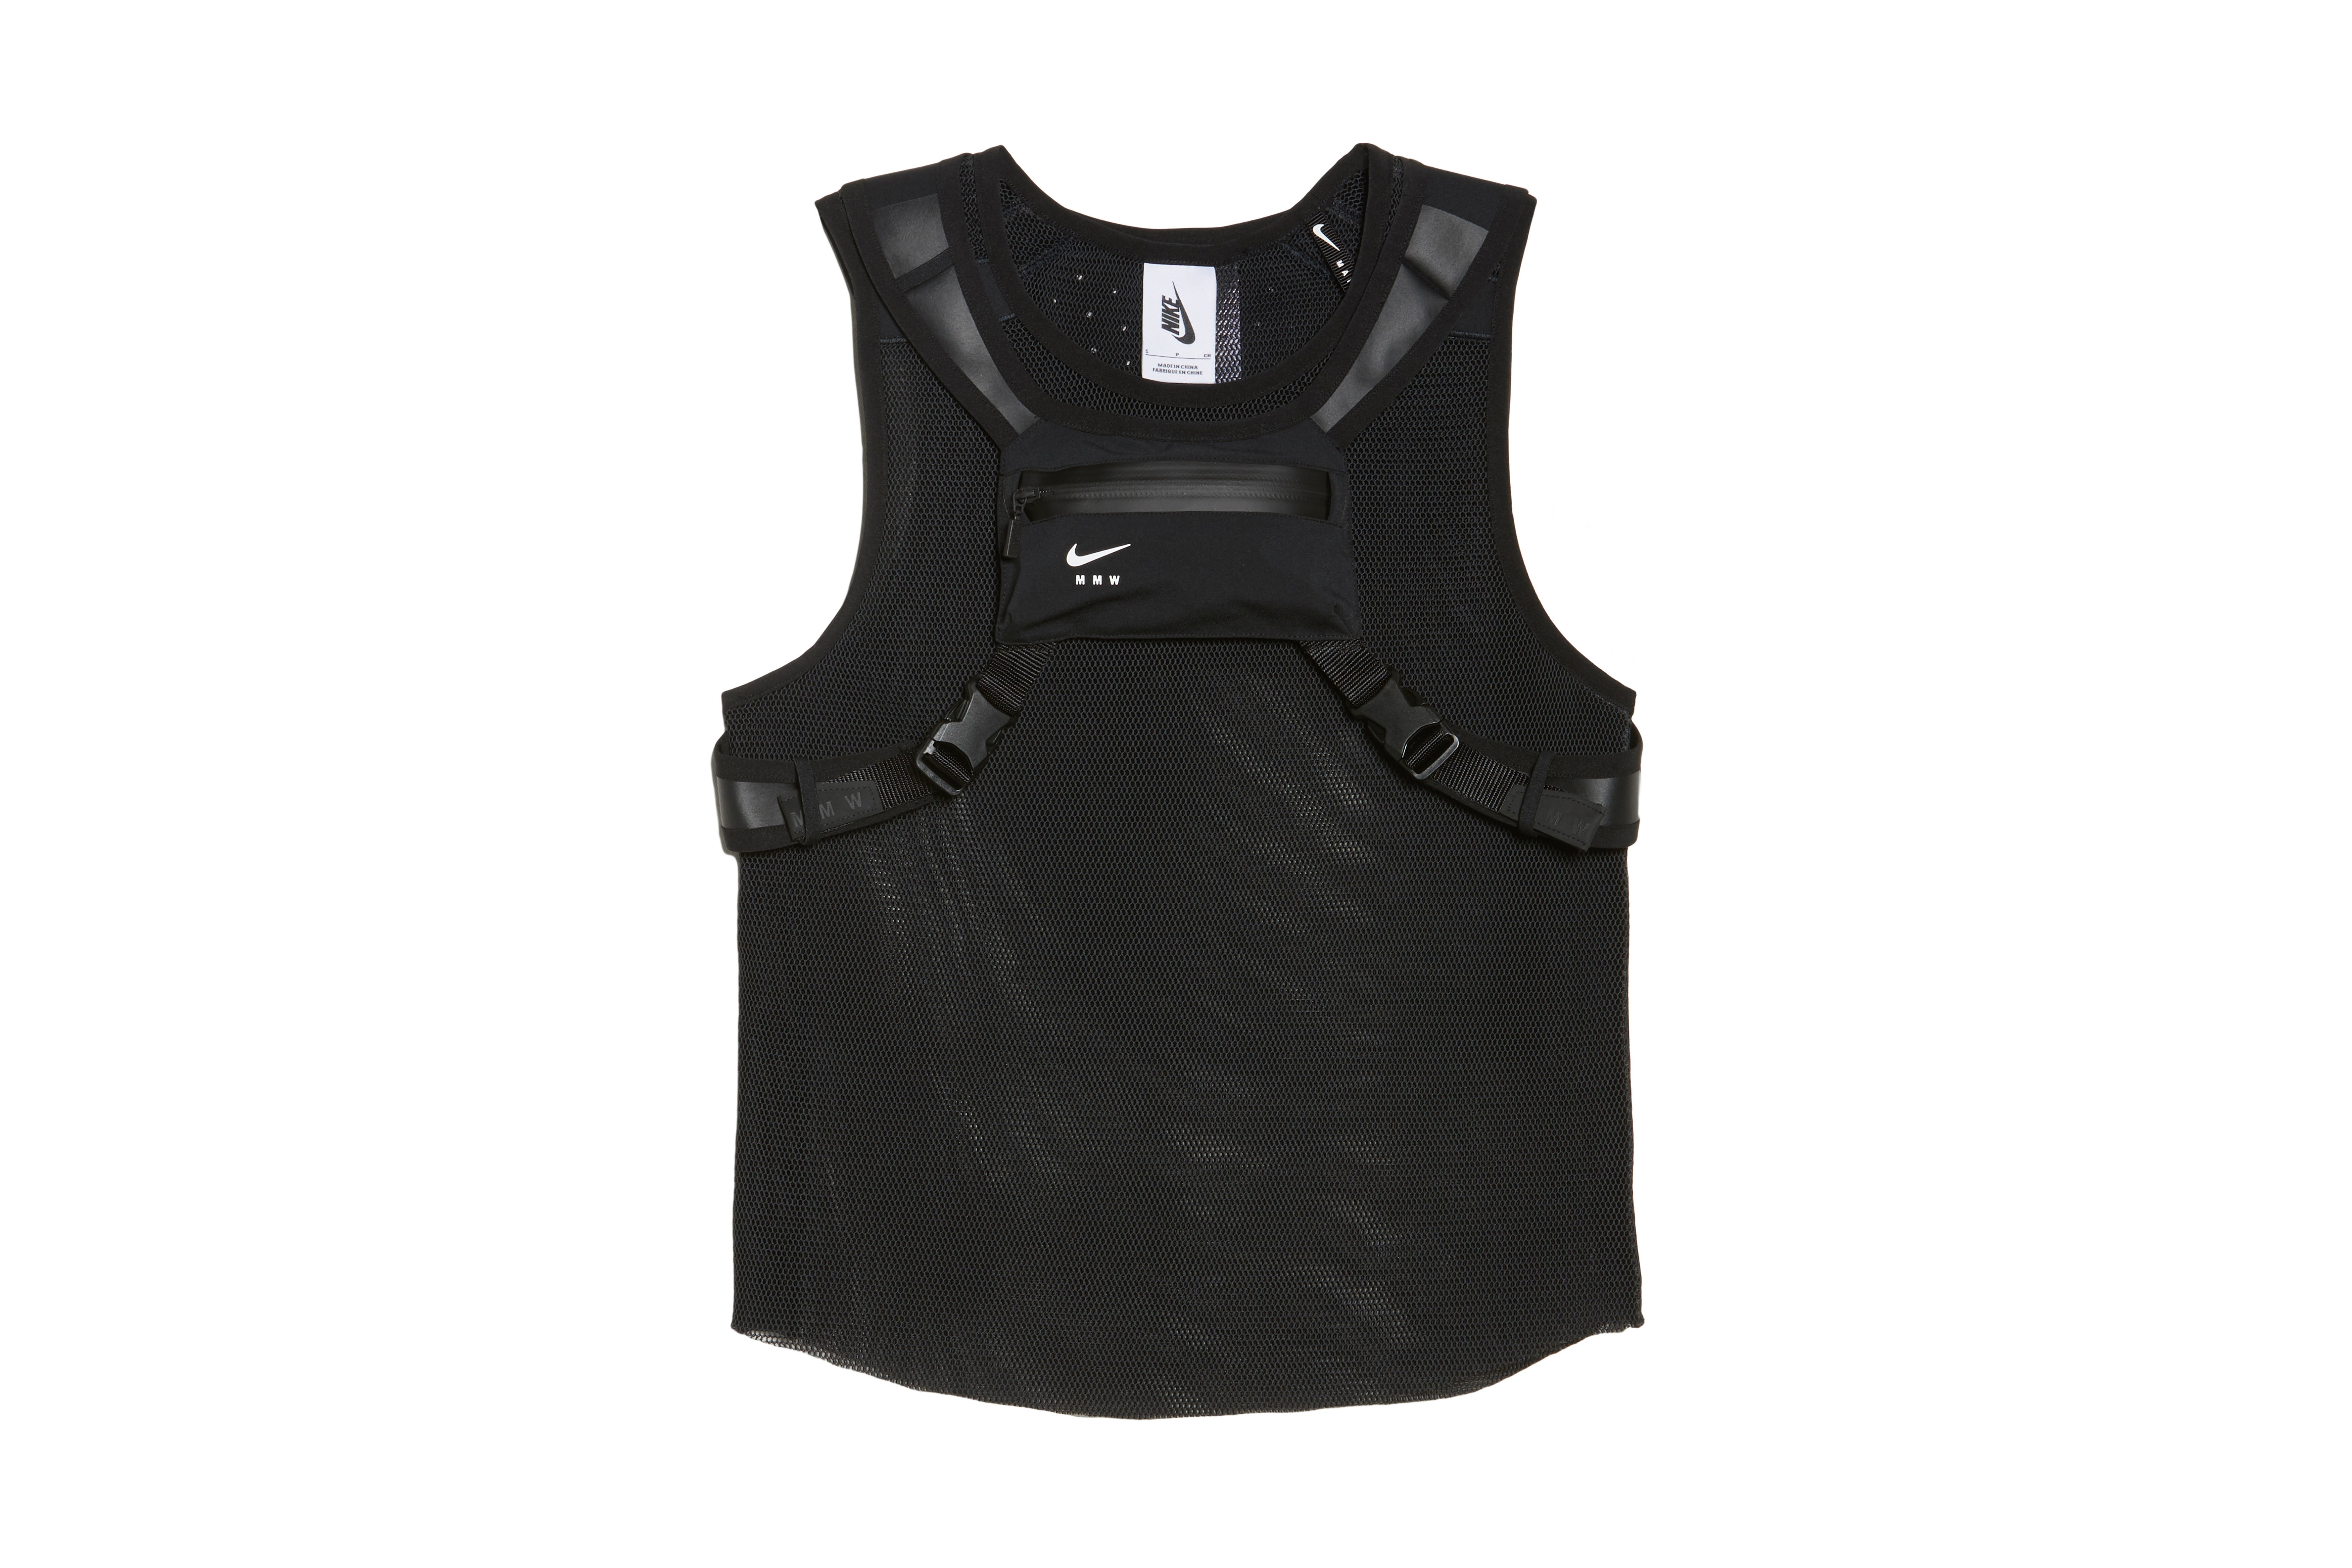 Matthew Williams Nike Training Collection 001 Where To Buy Nordstrom Collection Tactical Wear Vest ALYX